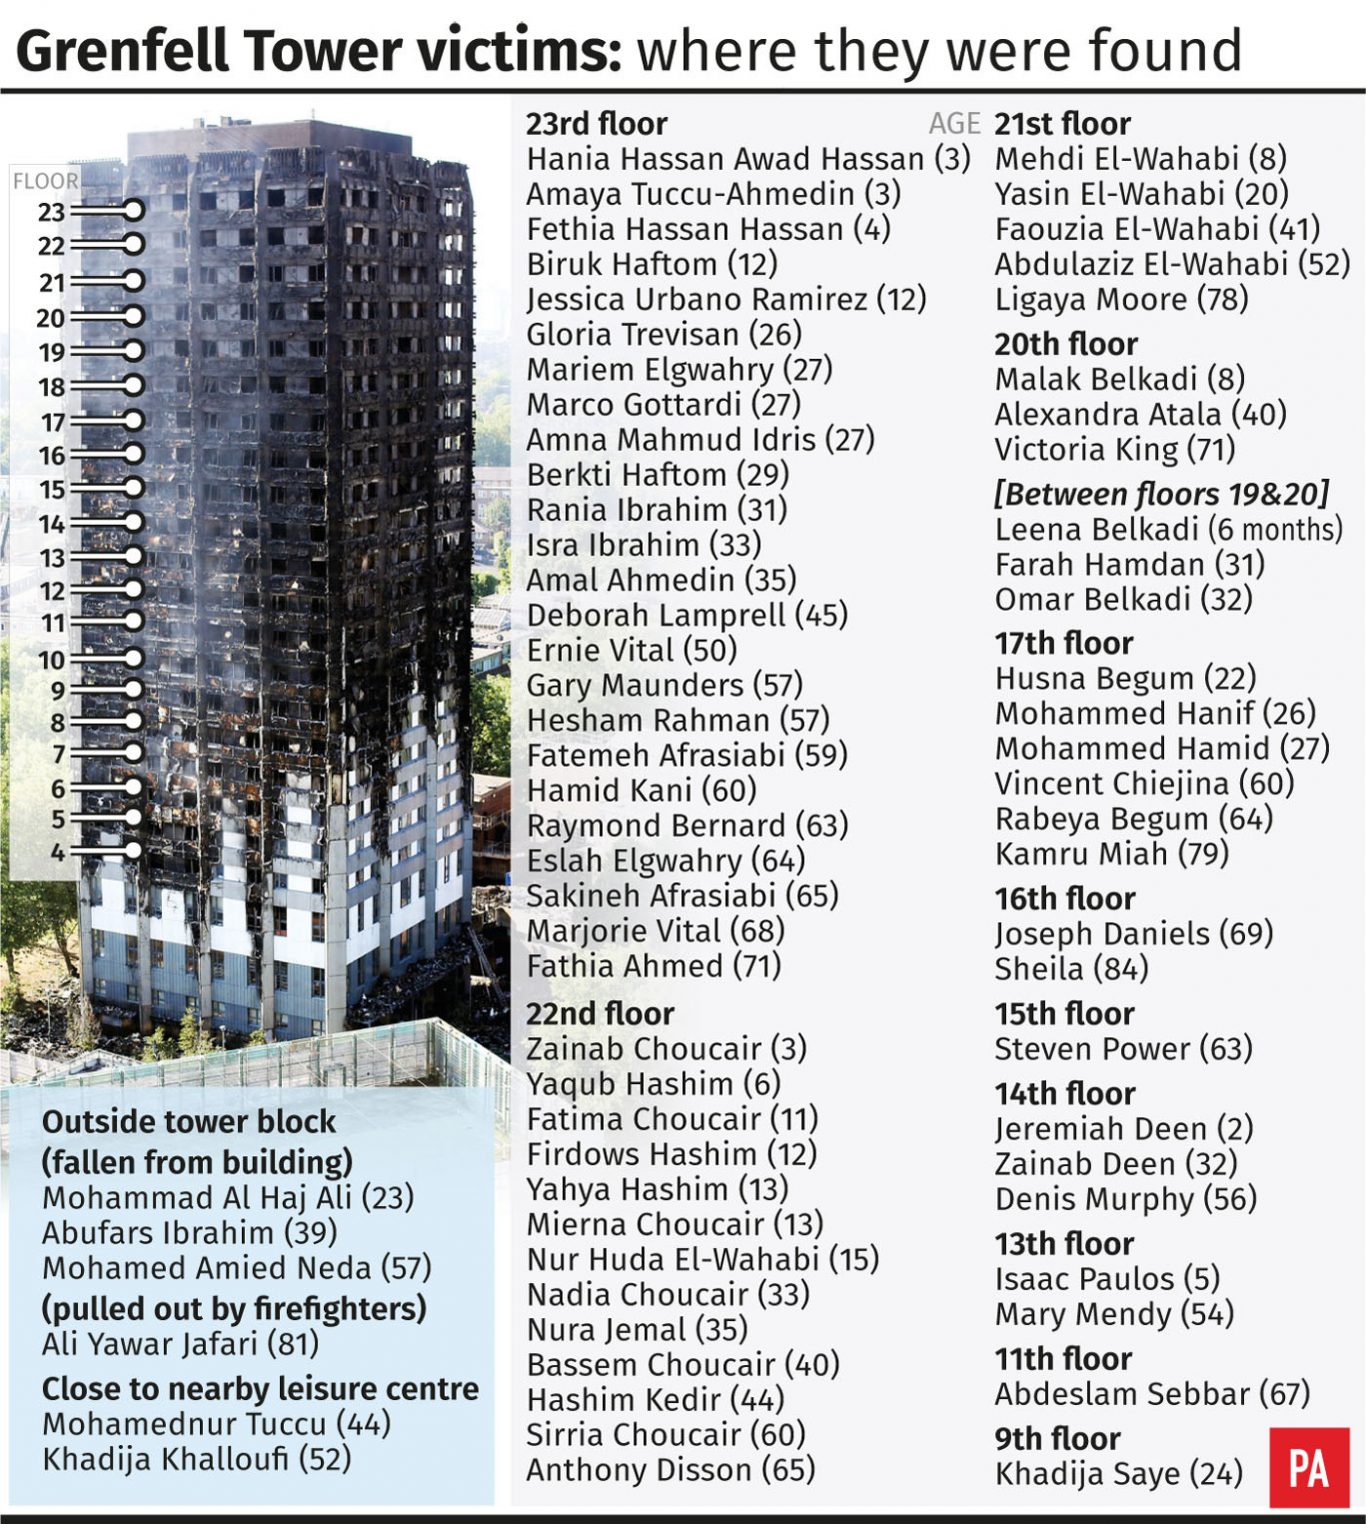 The victims of Grenfell Tower 